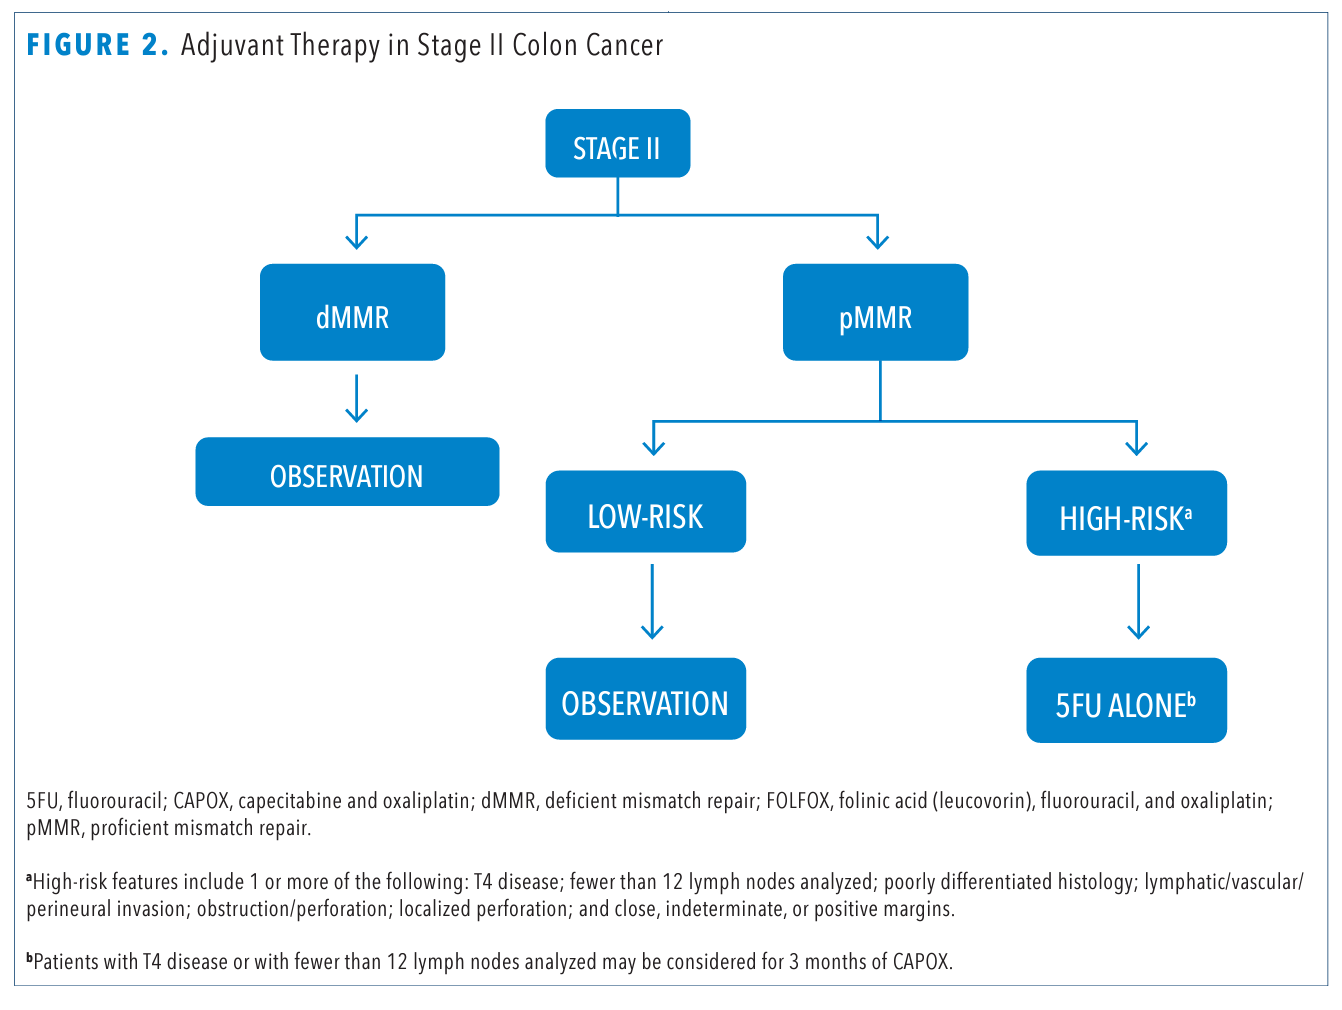 Adjuvant Therapy in Stage II Colon Cancer